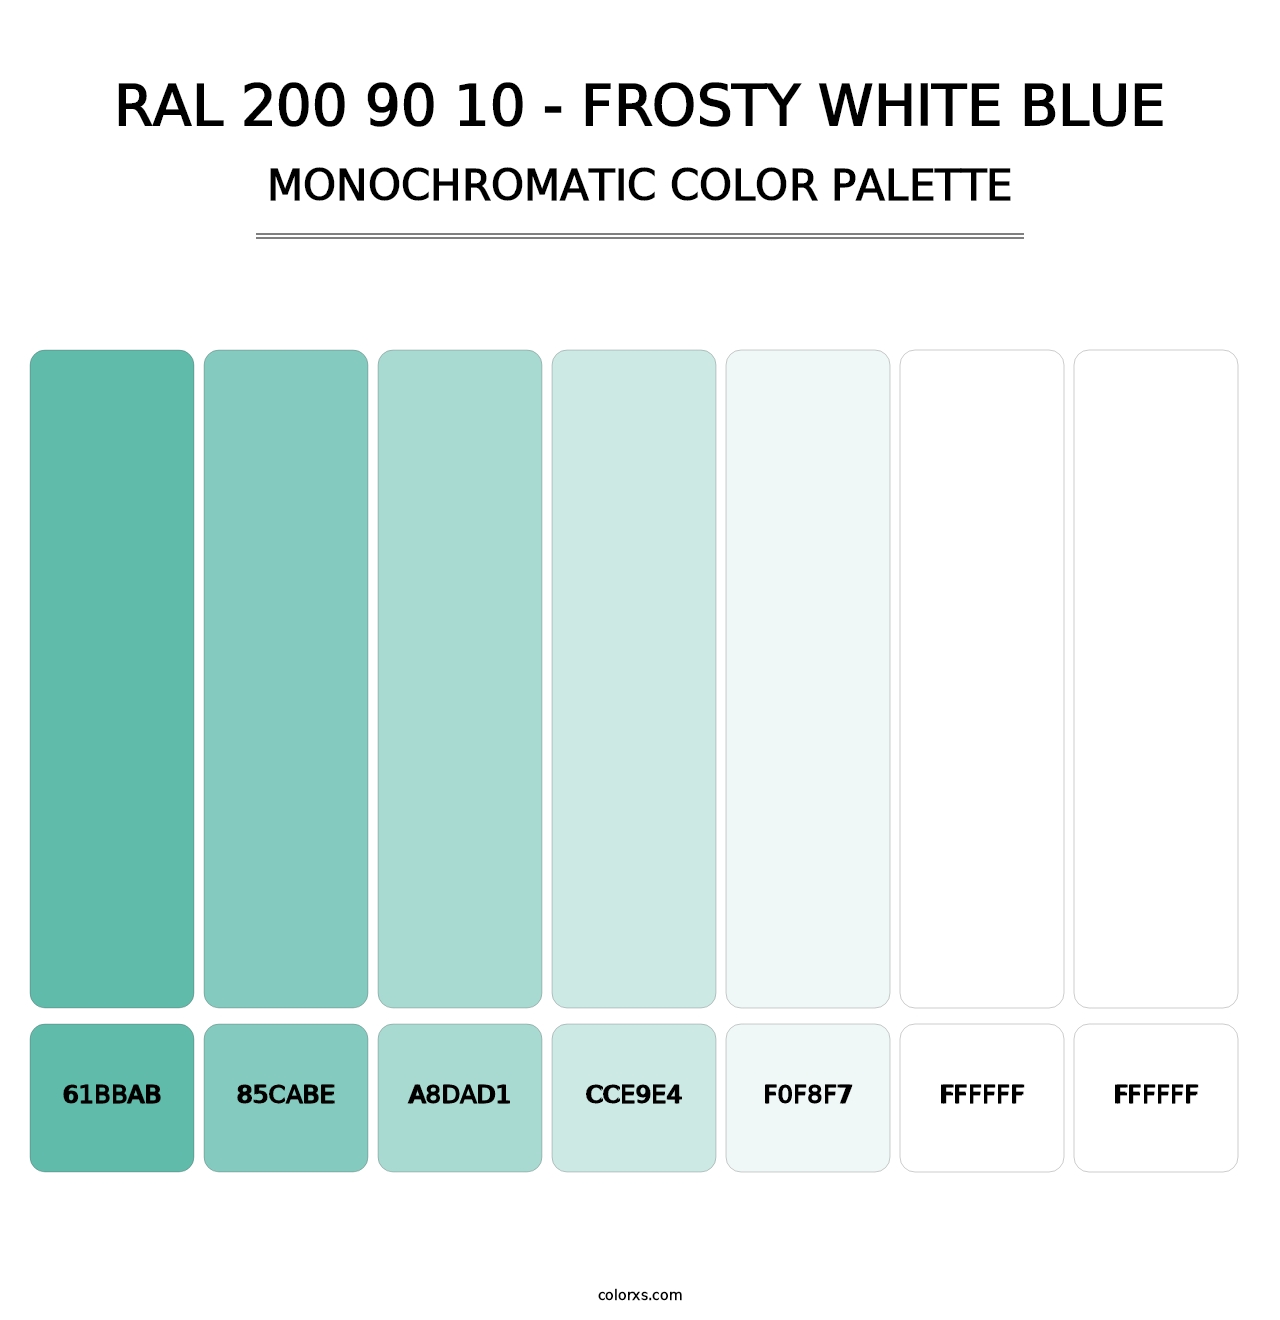 RAL 200 90 10 - Frosty White Blue - Monochromatic Color Palette